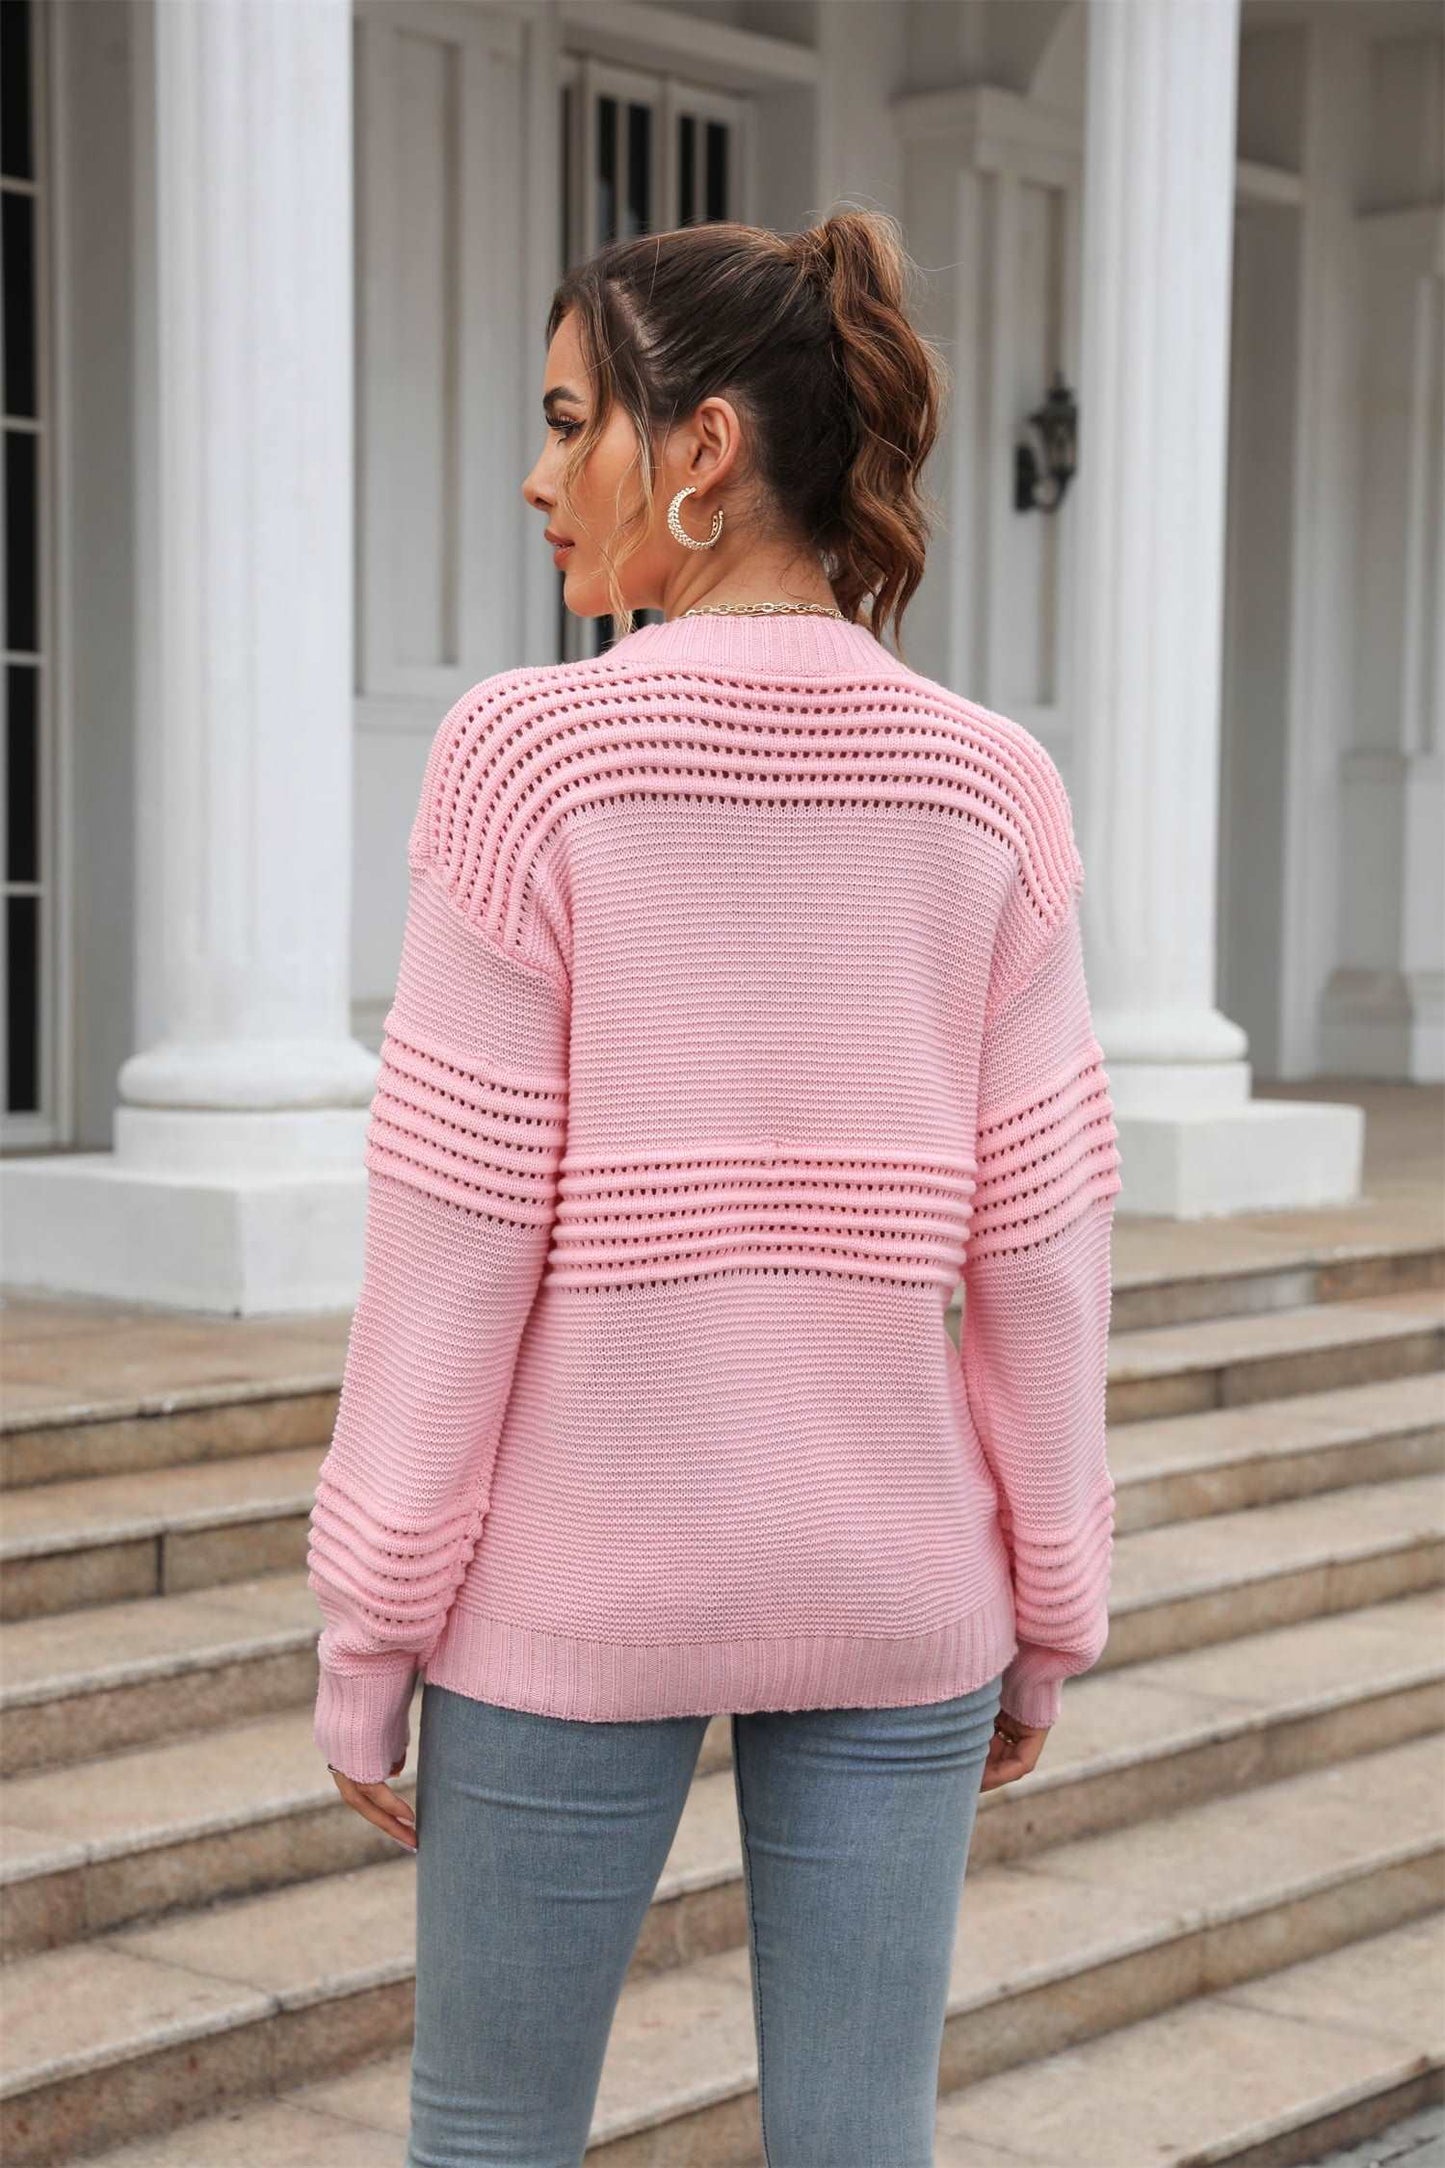 A Chic Long Sleeve Pullover Sweater